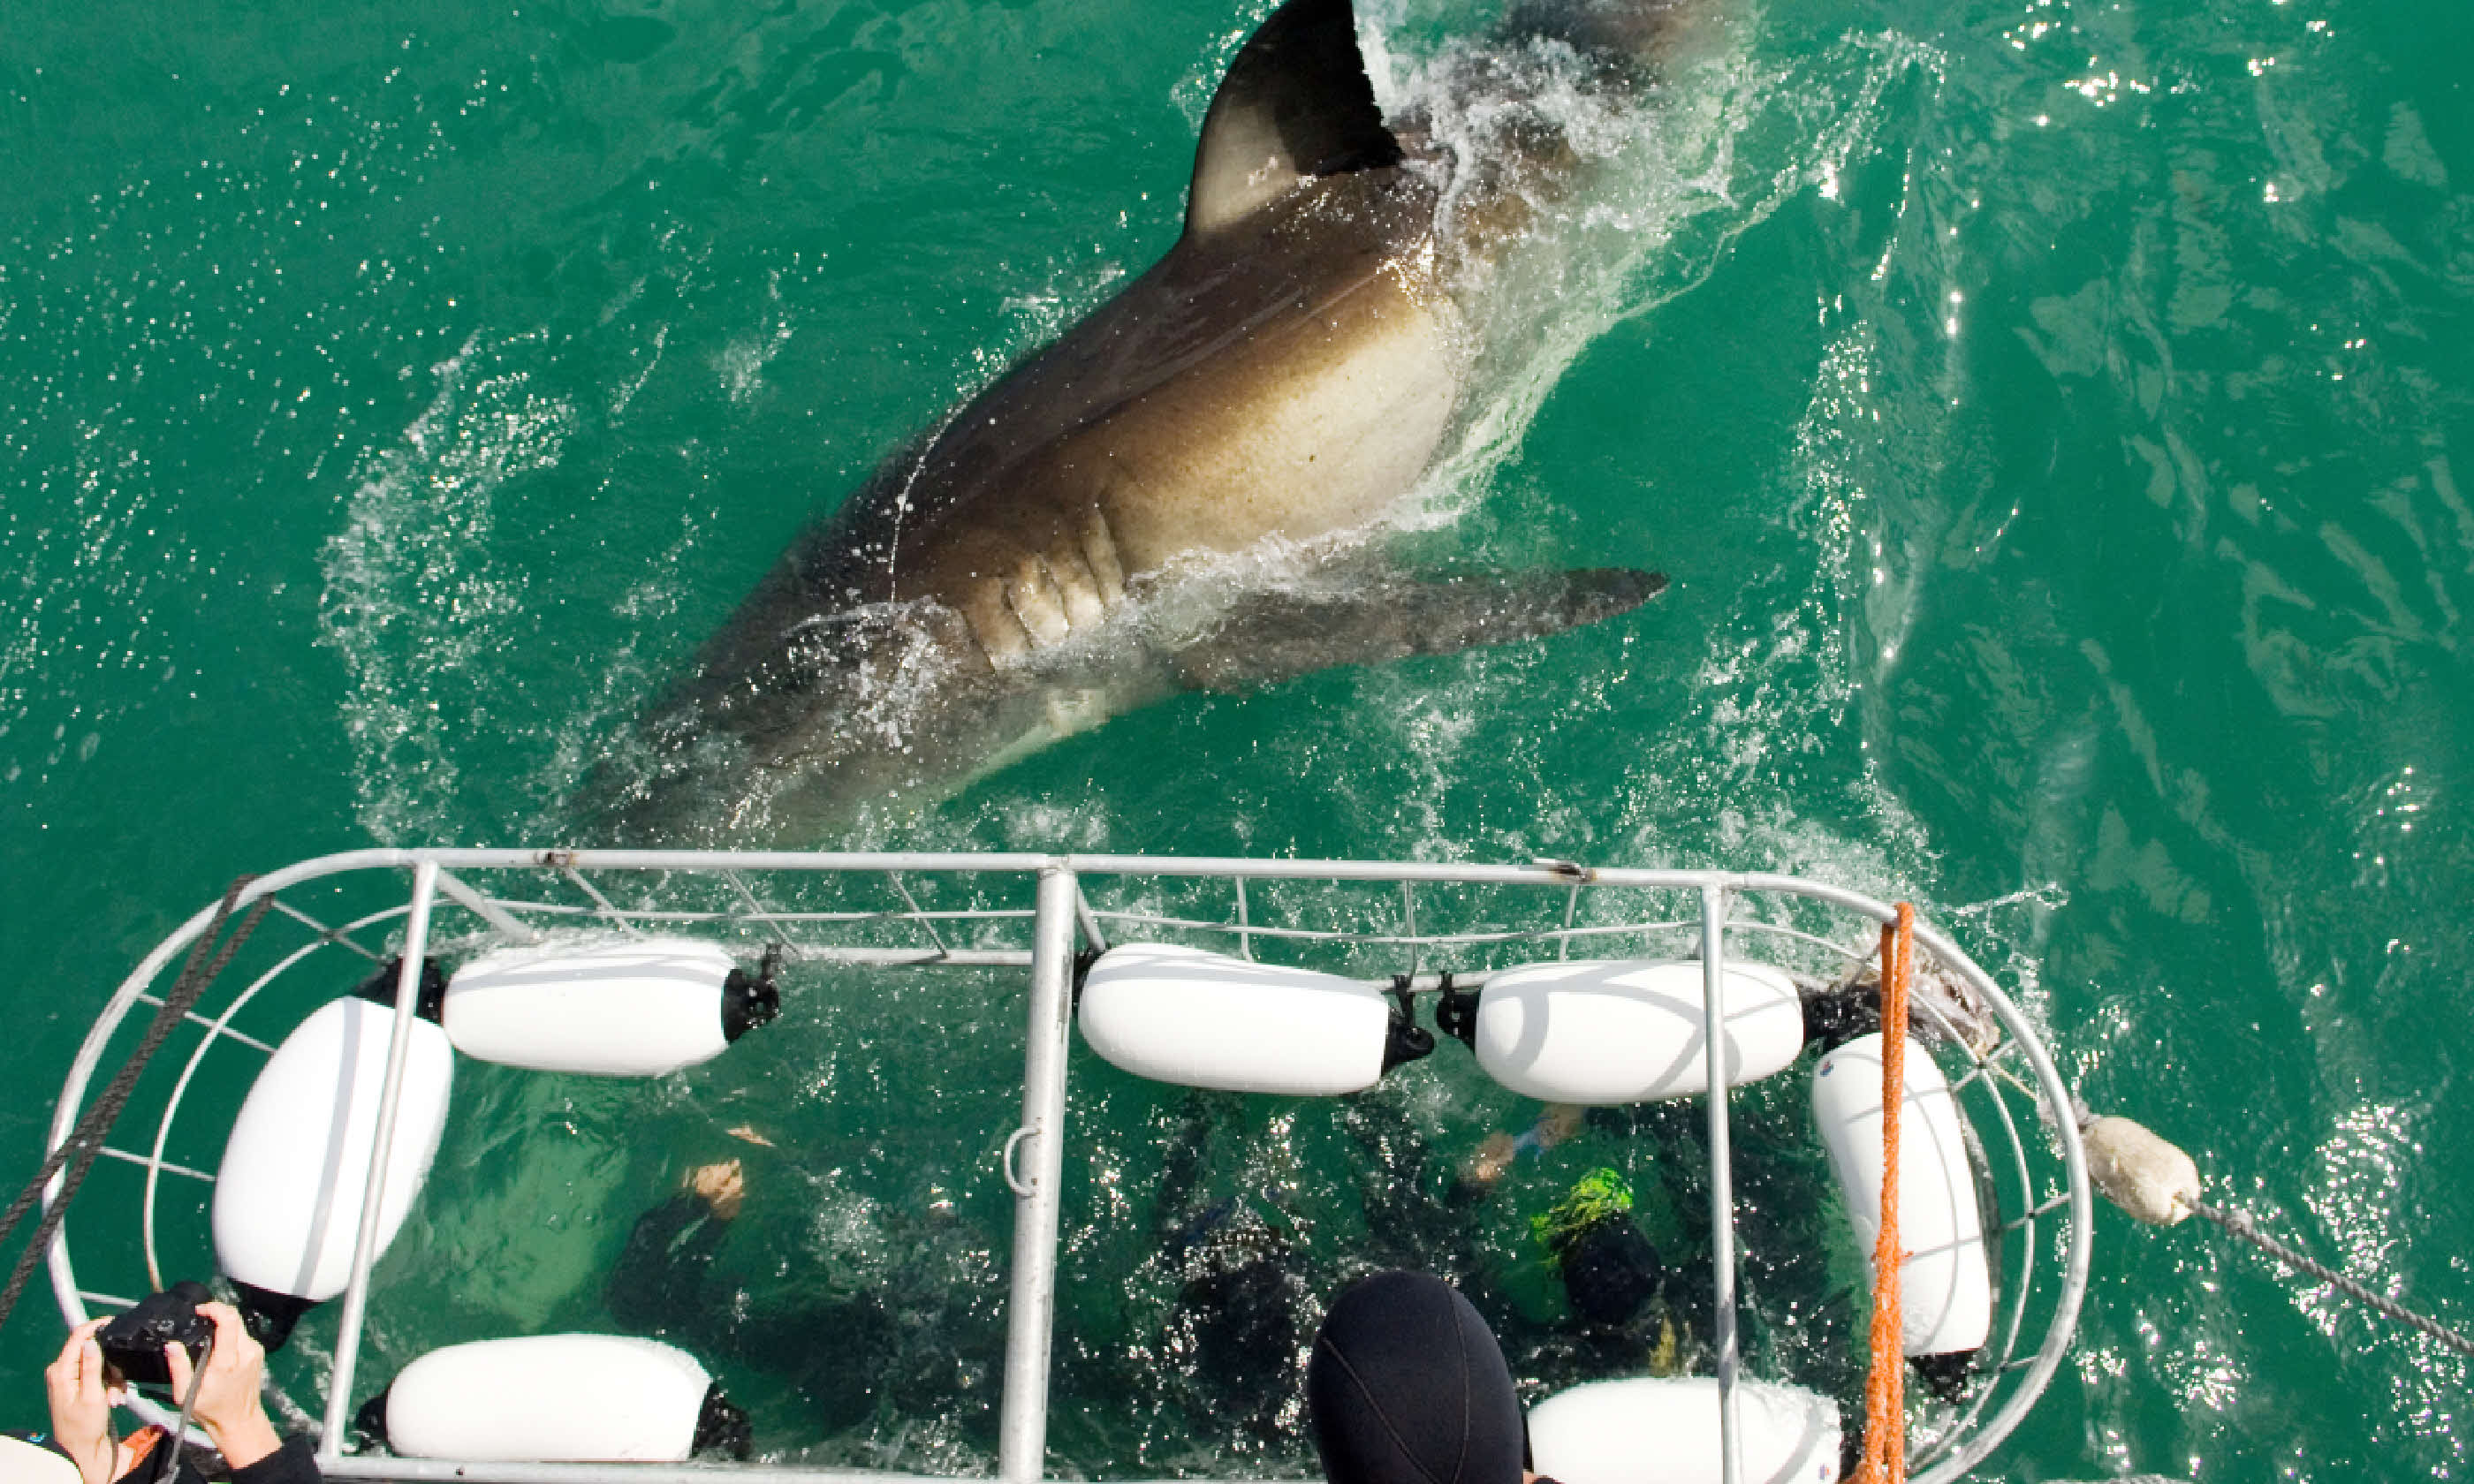 Cage divers face a Great White Shark (Shutterstock)